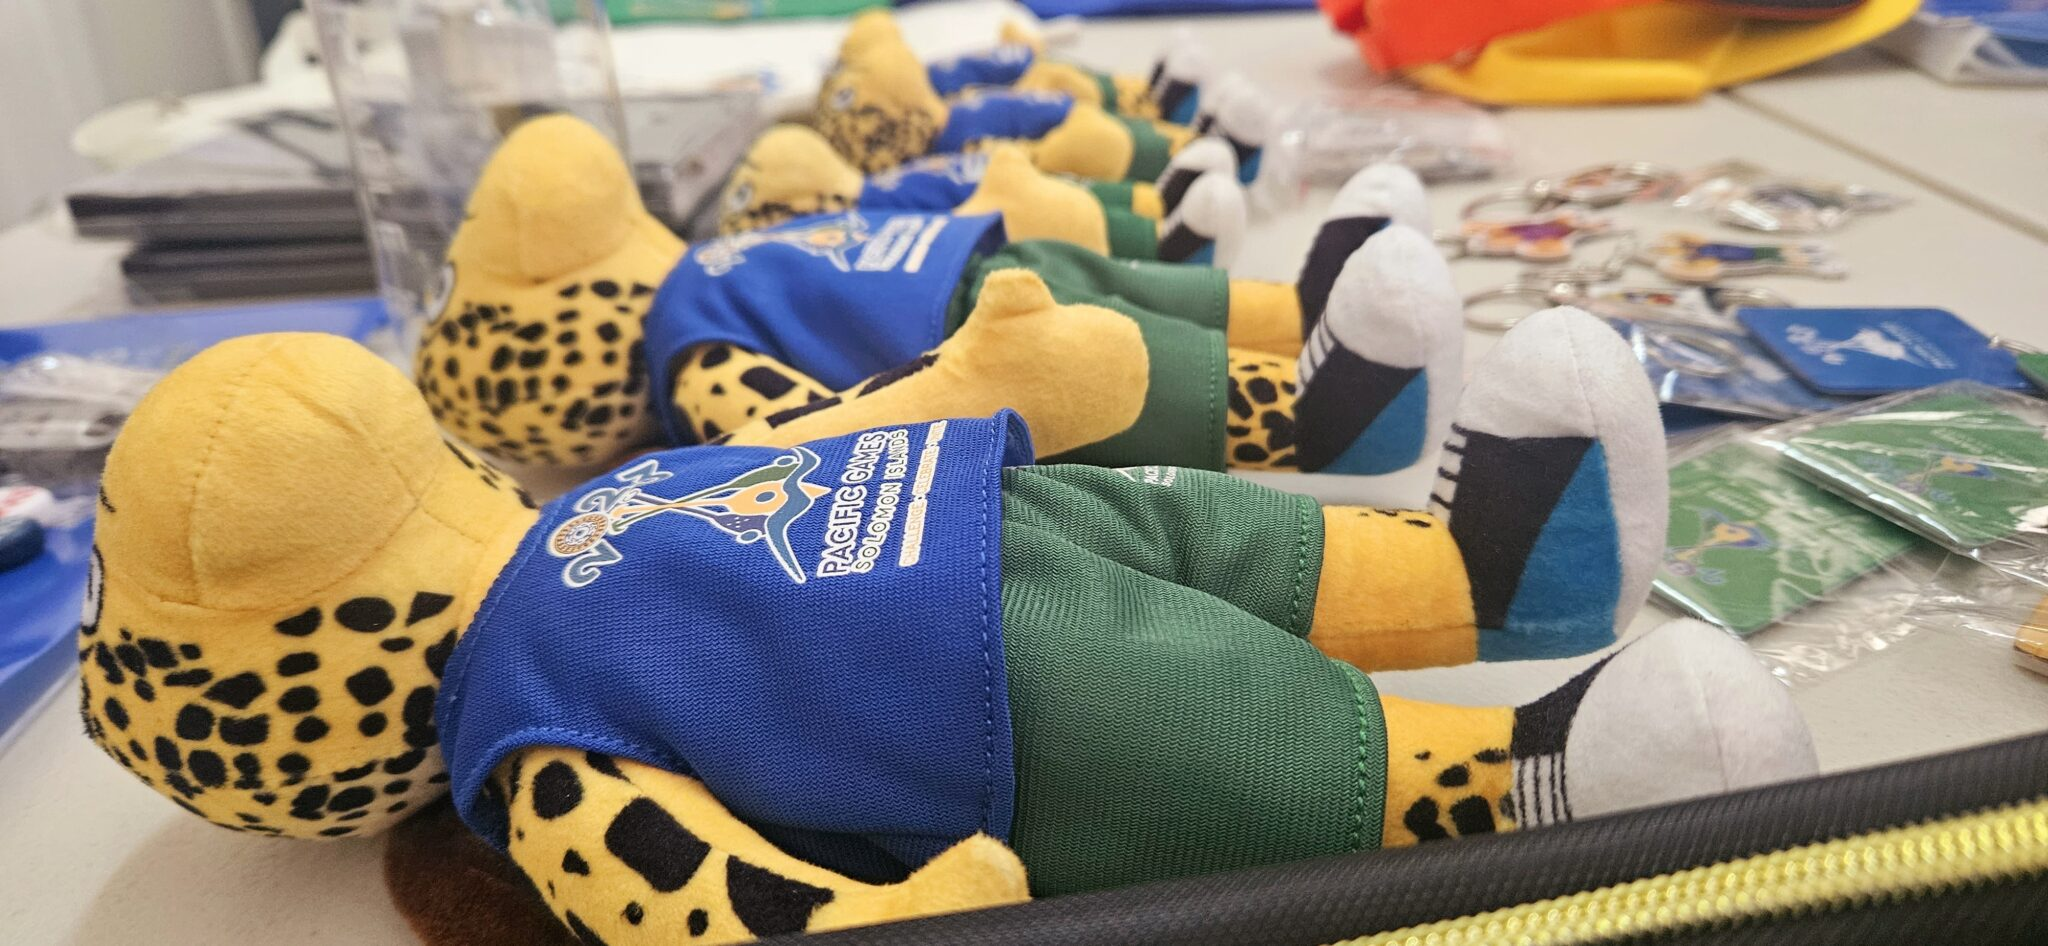 Plush toys of the 2023 Pacific Games mascot Solo will be part of the merchandise to be produced by Ausmart ©Solomon Islands 2023